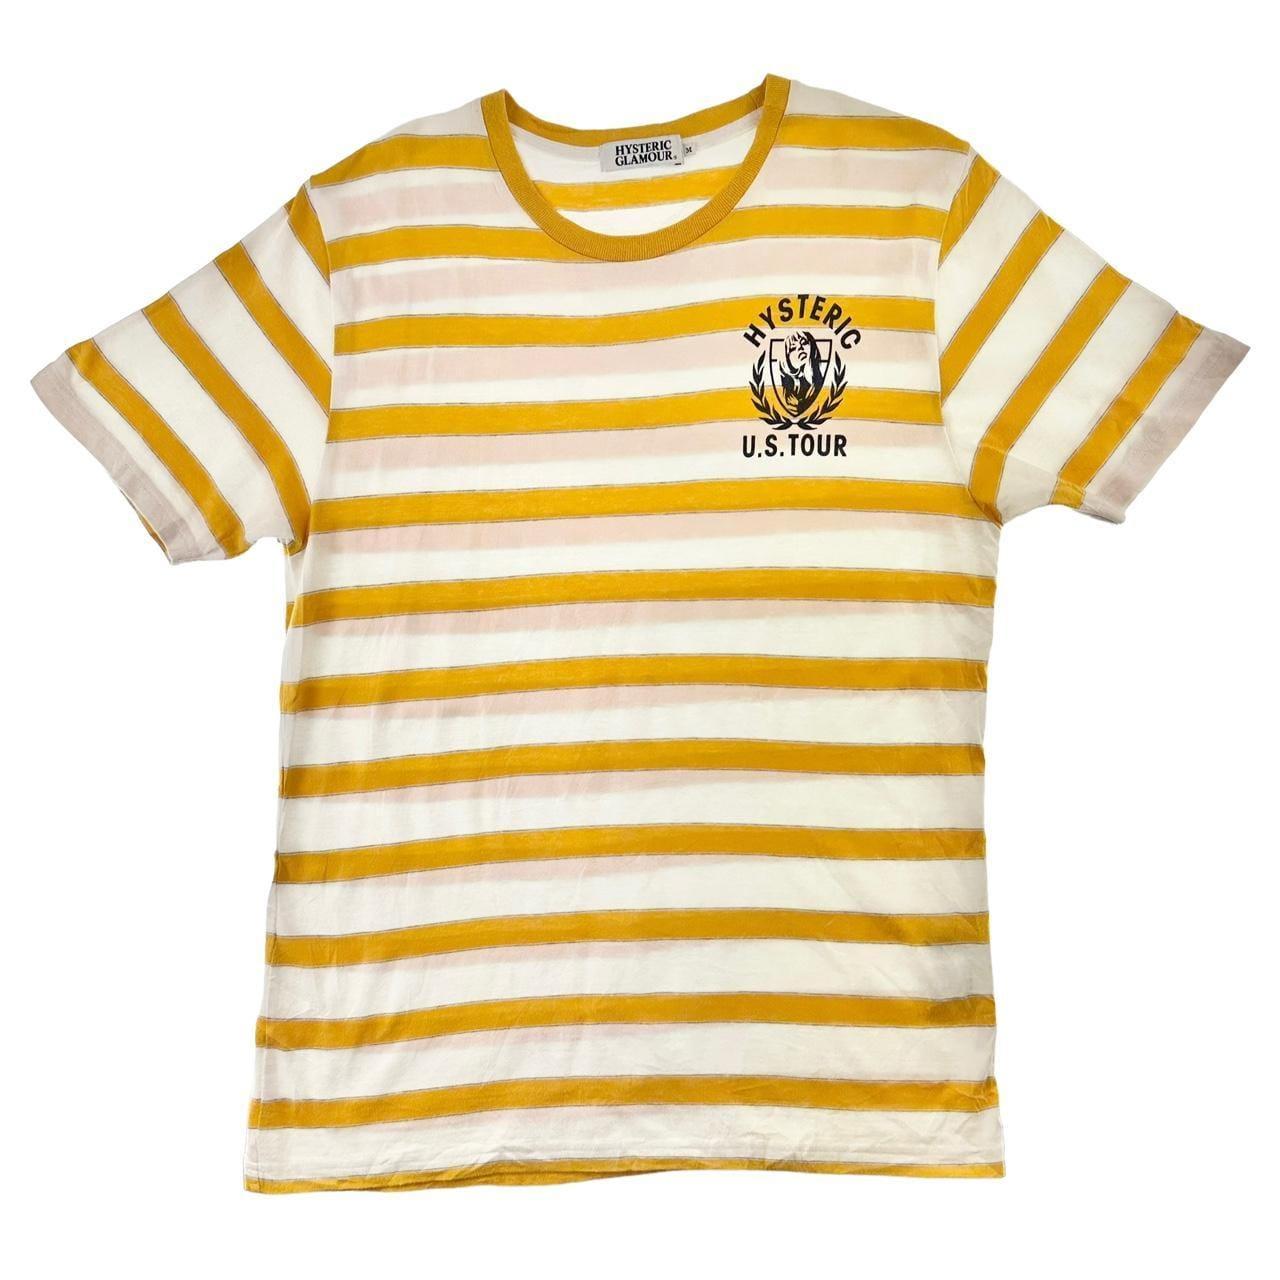 Hysteric Glamour striped t shirt size M - Known Source